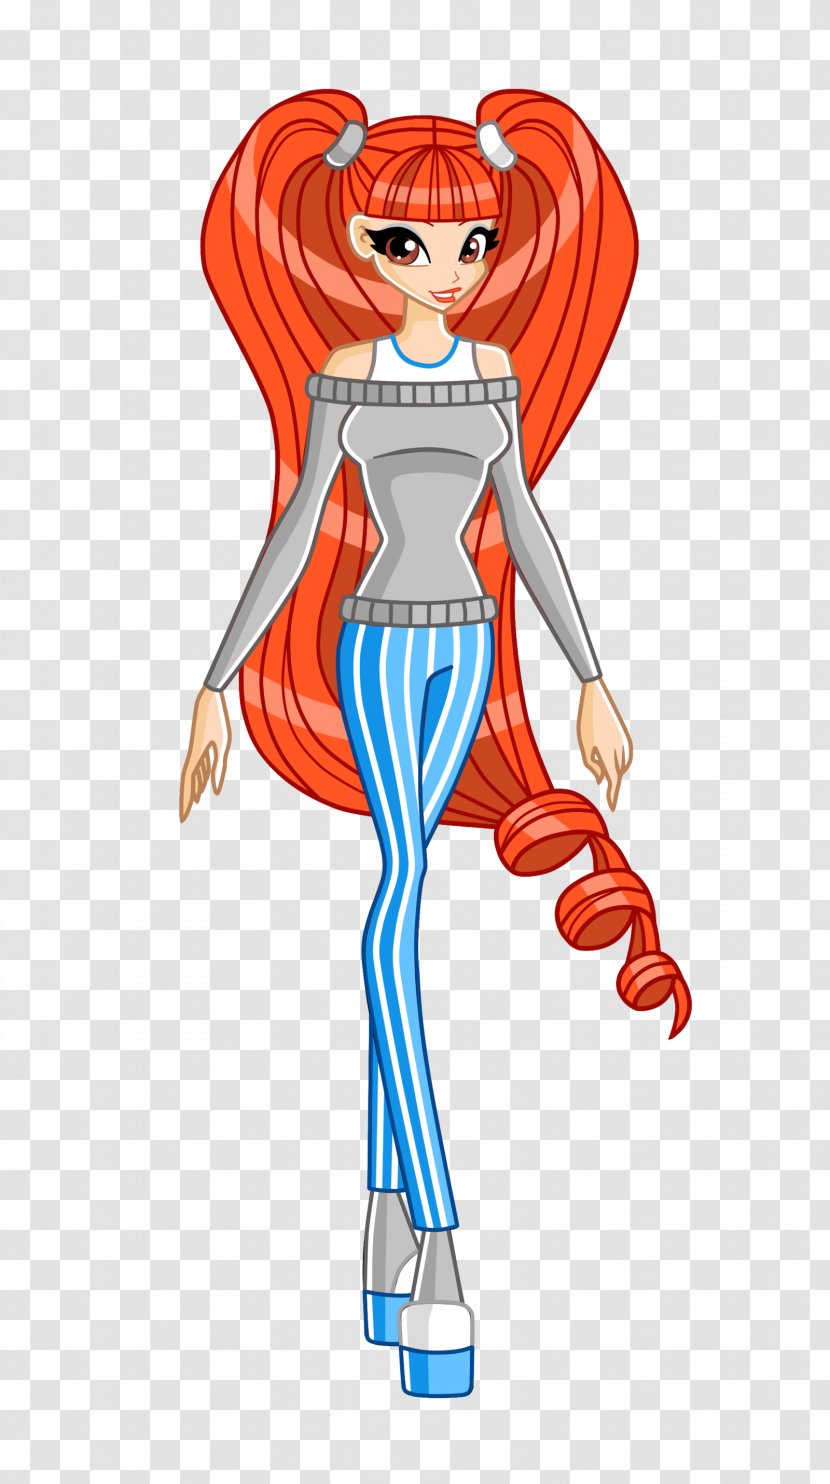 Clothing Legendary Creature Cartoon Muscle - Casual Dress Transparent PNG